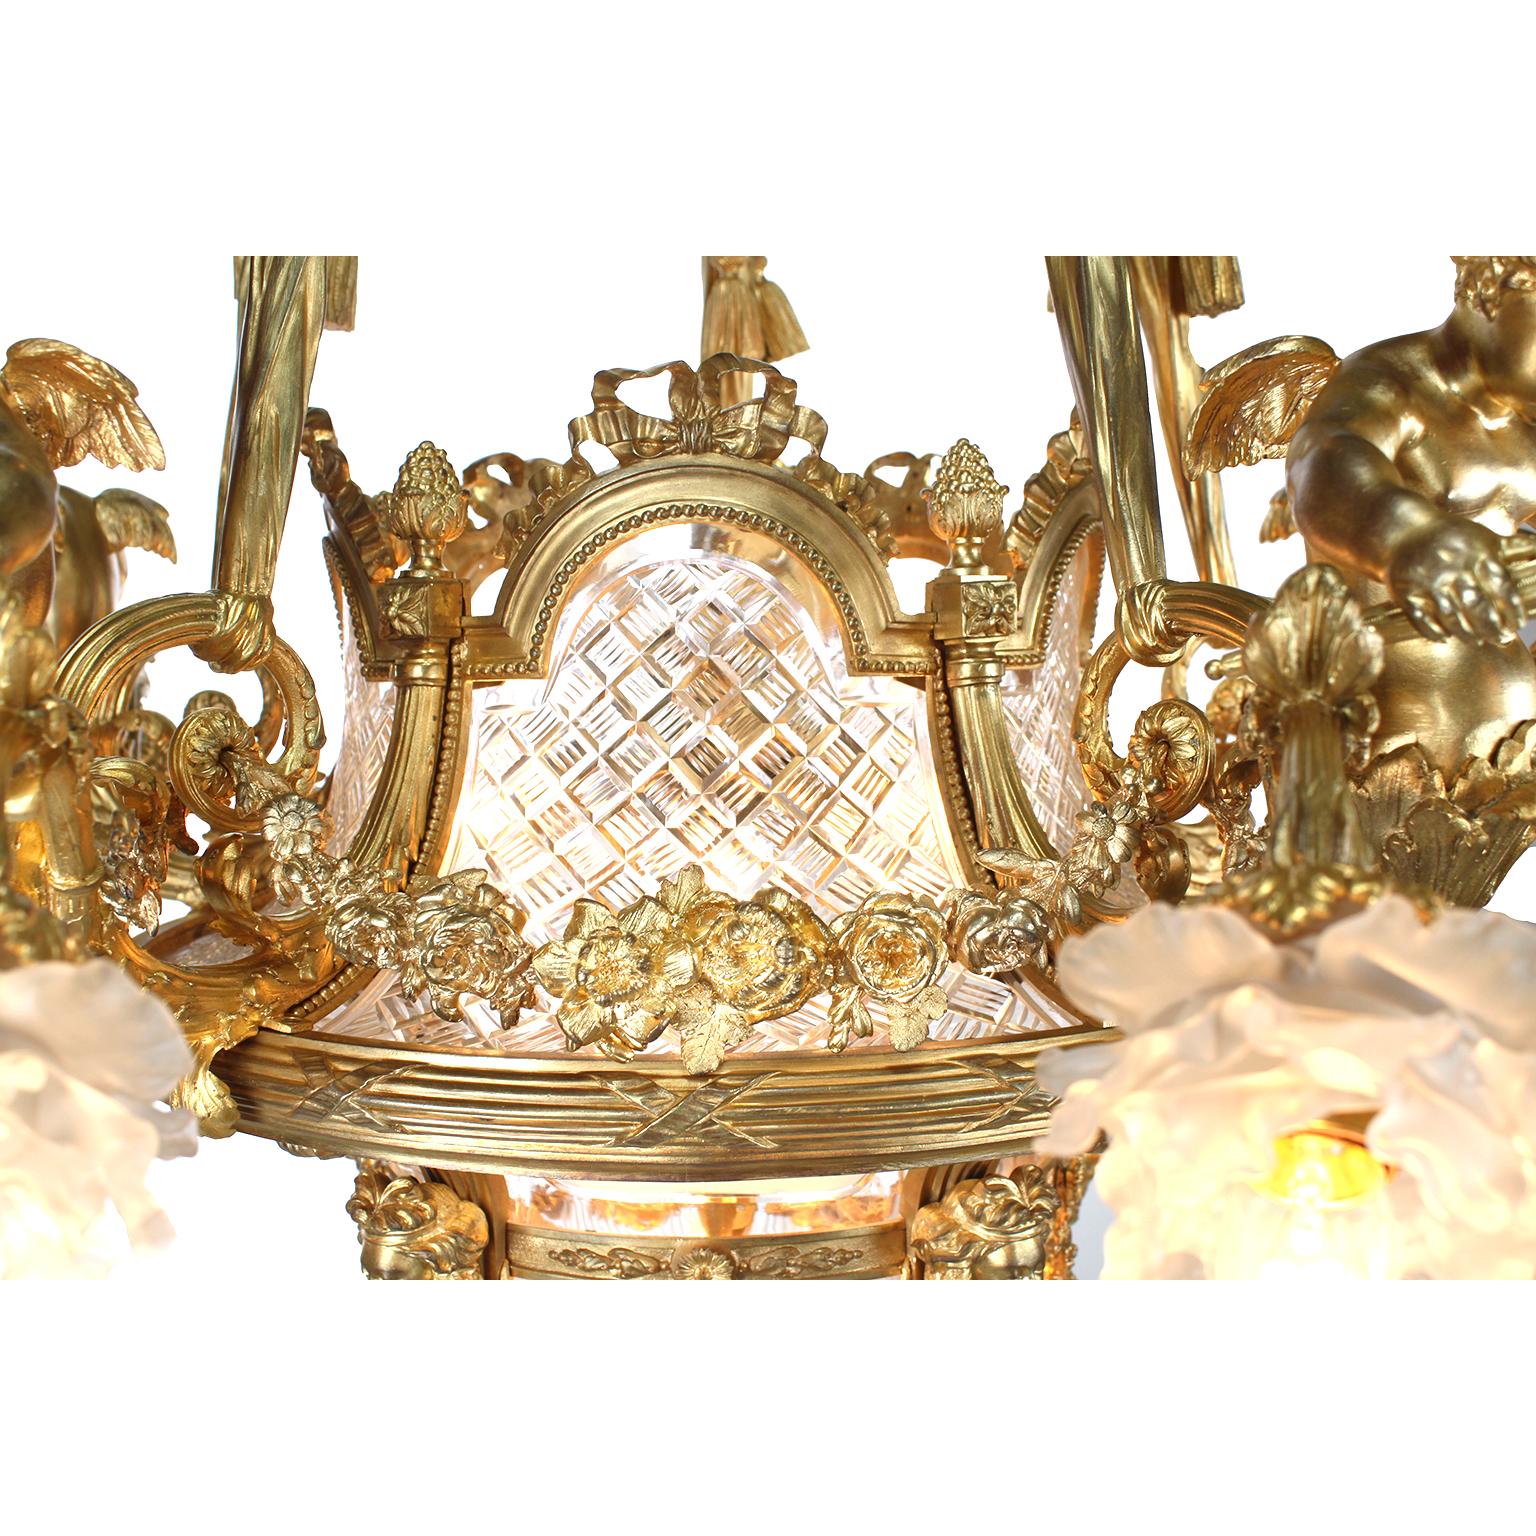 Fine French 19th-20th Century Louis XV Style Gilt Bronze and Baccarat Chandelier For Sale 4